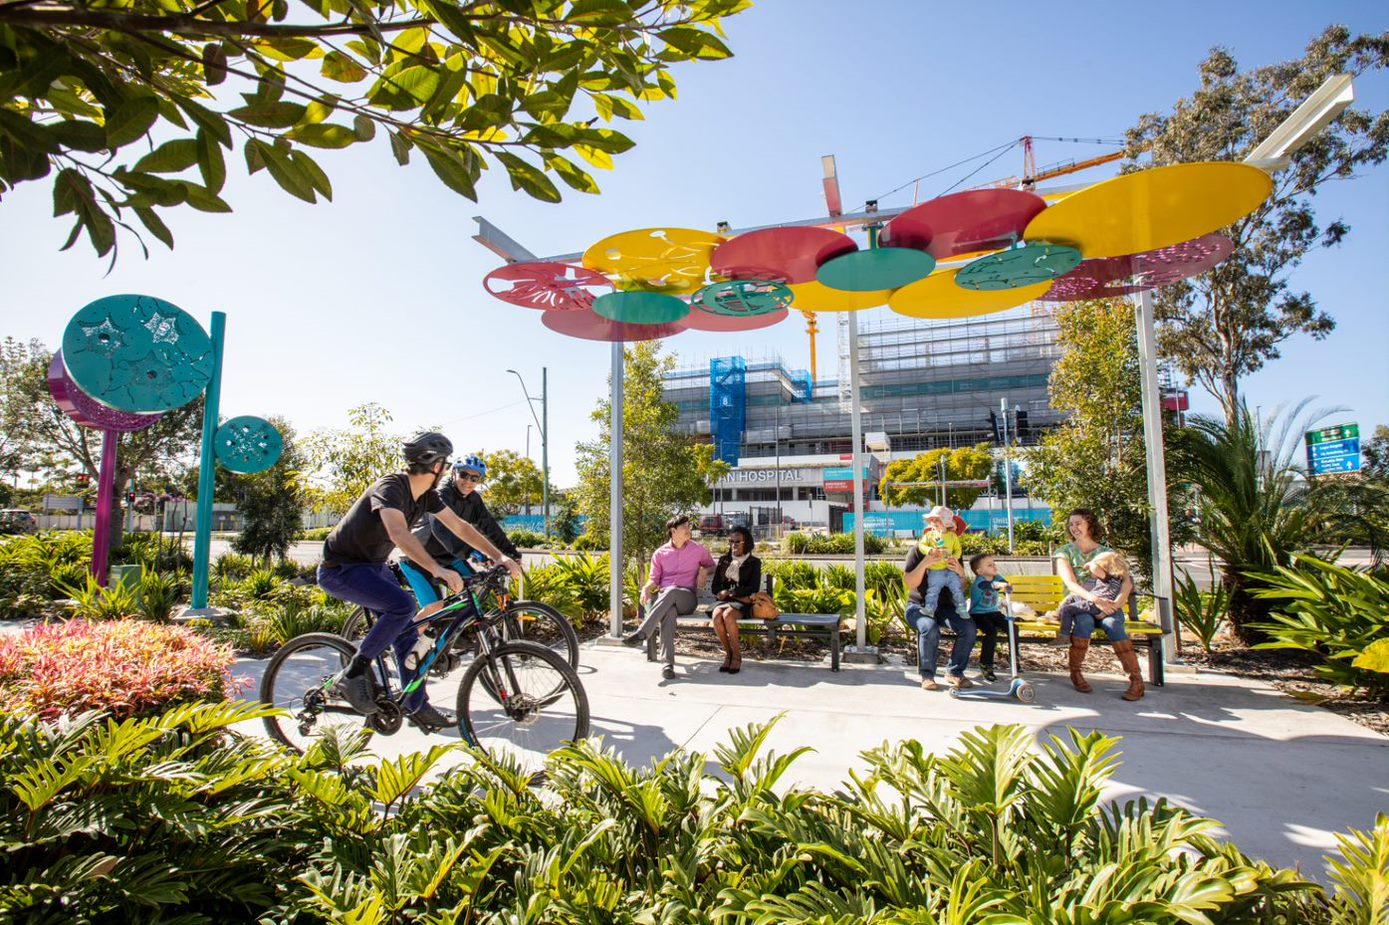 Two people riding their bikes on the new healthy street paths, behind them people are seen sitting below a colourful shade structure. In the background additional disk structures are visible among the greenery.